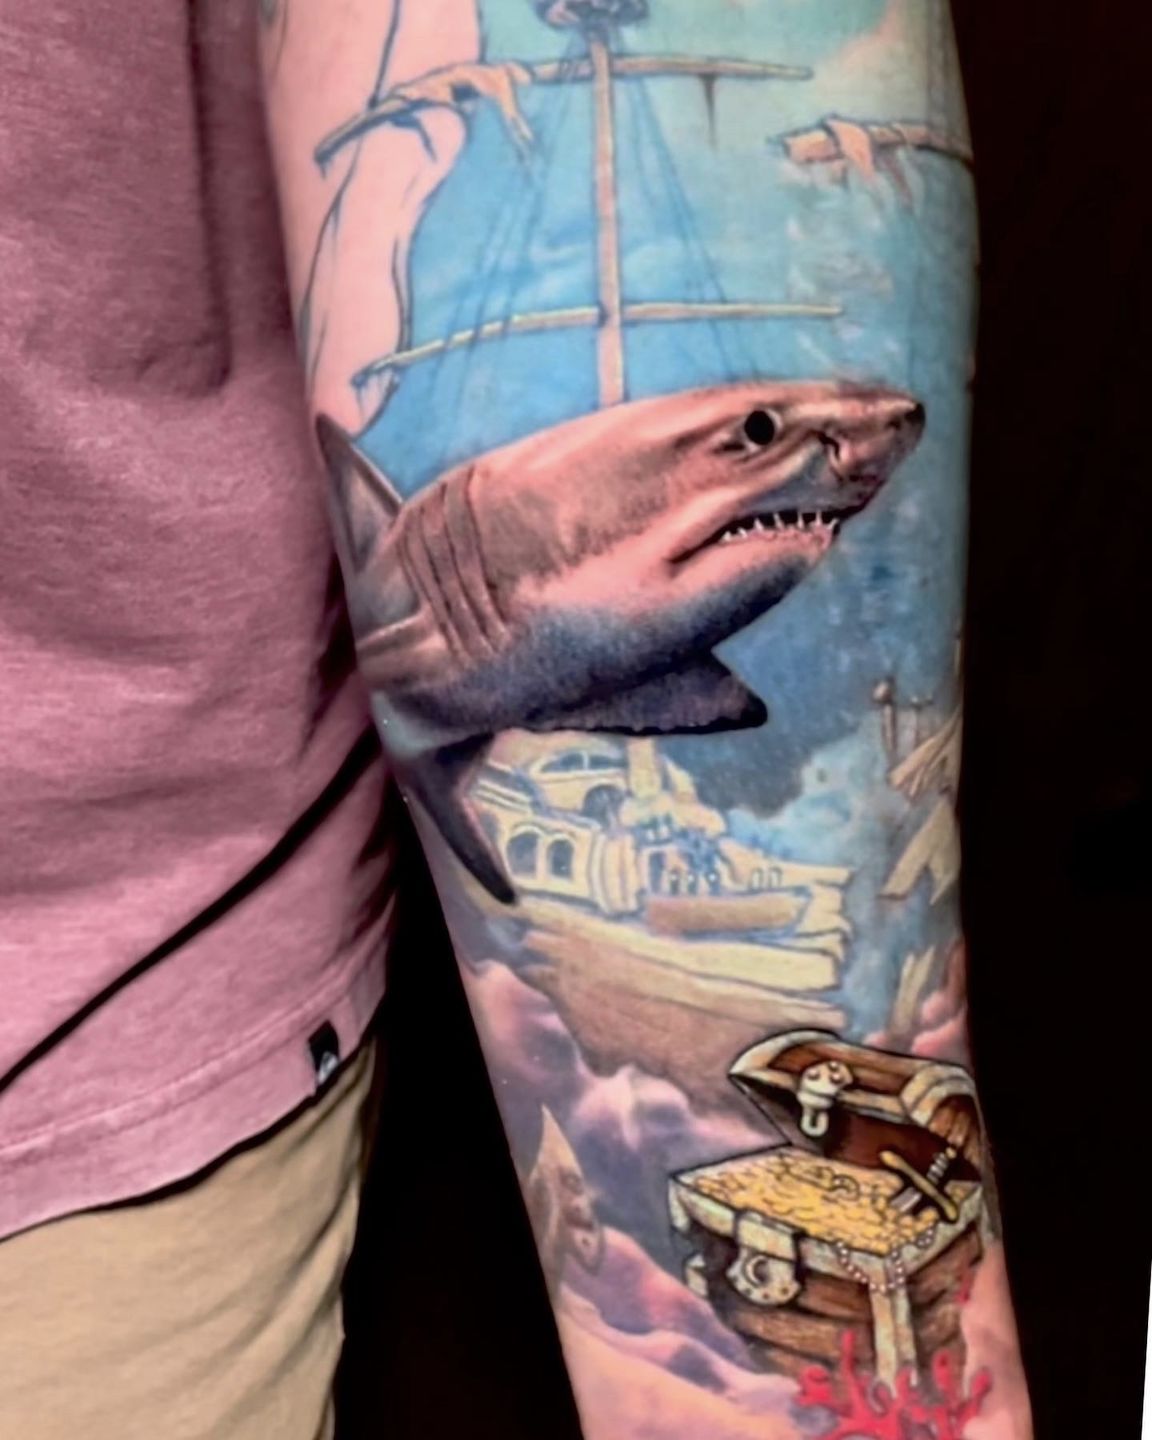 Rare striped shark tattoo on the right inner arm.